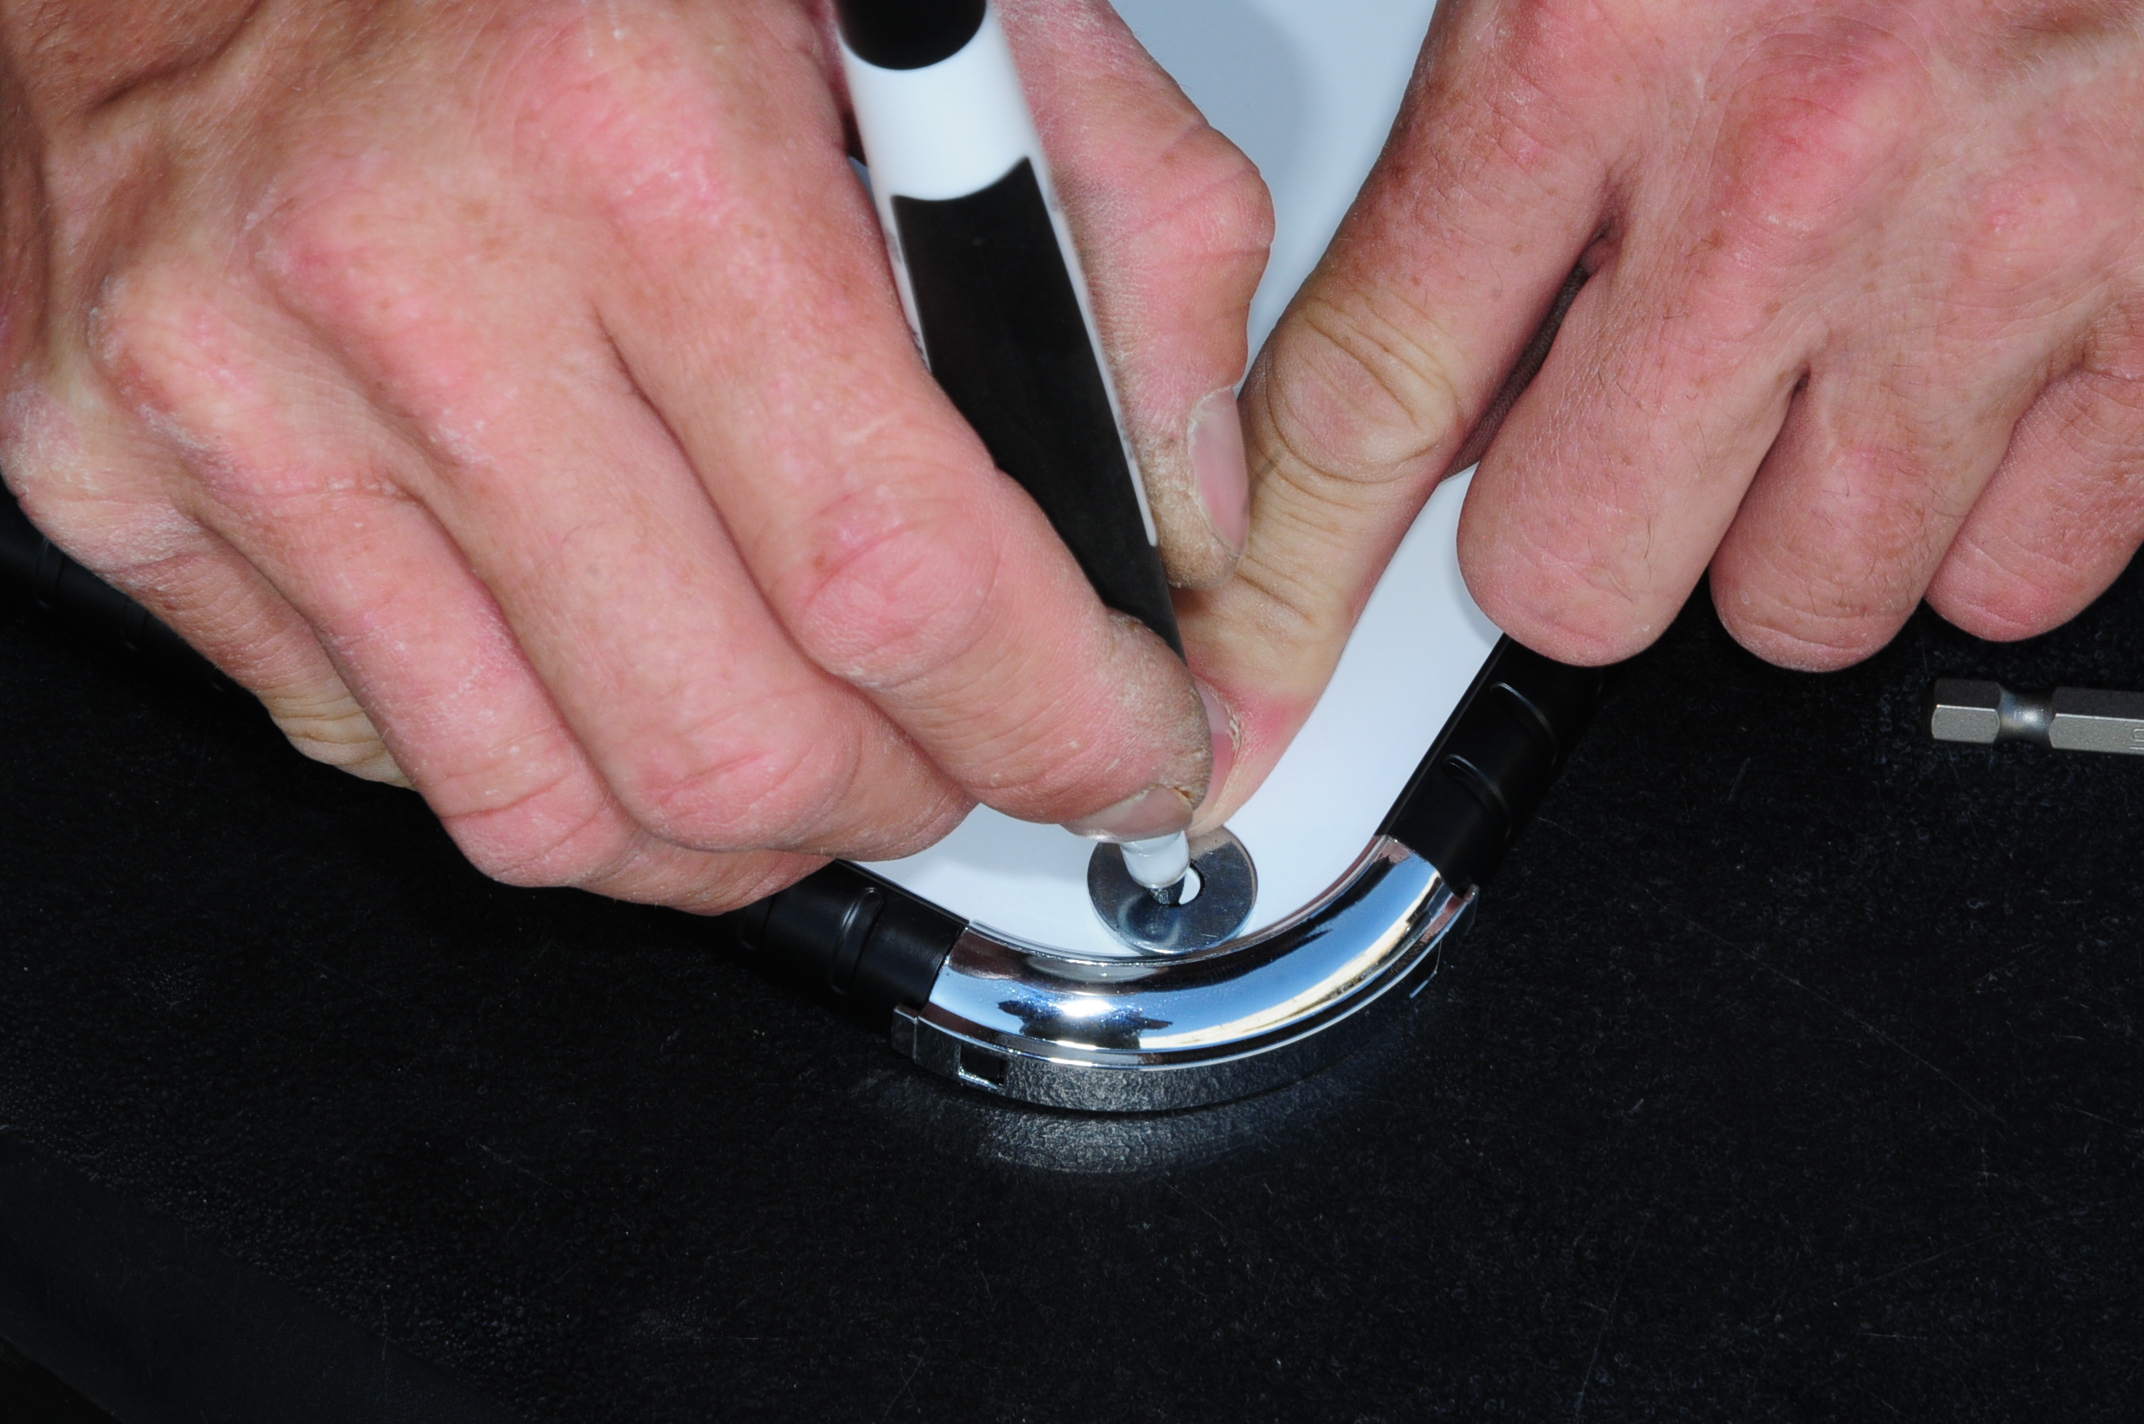 technician marks a washers placement on a white board corner using the provided white board marker